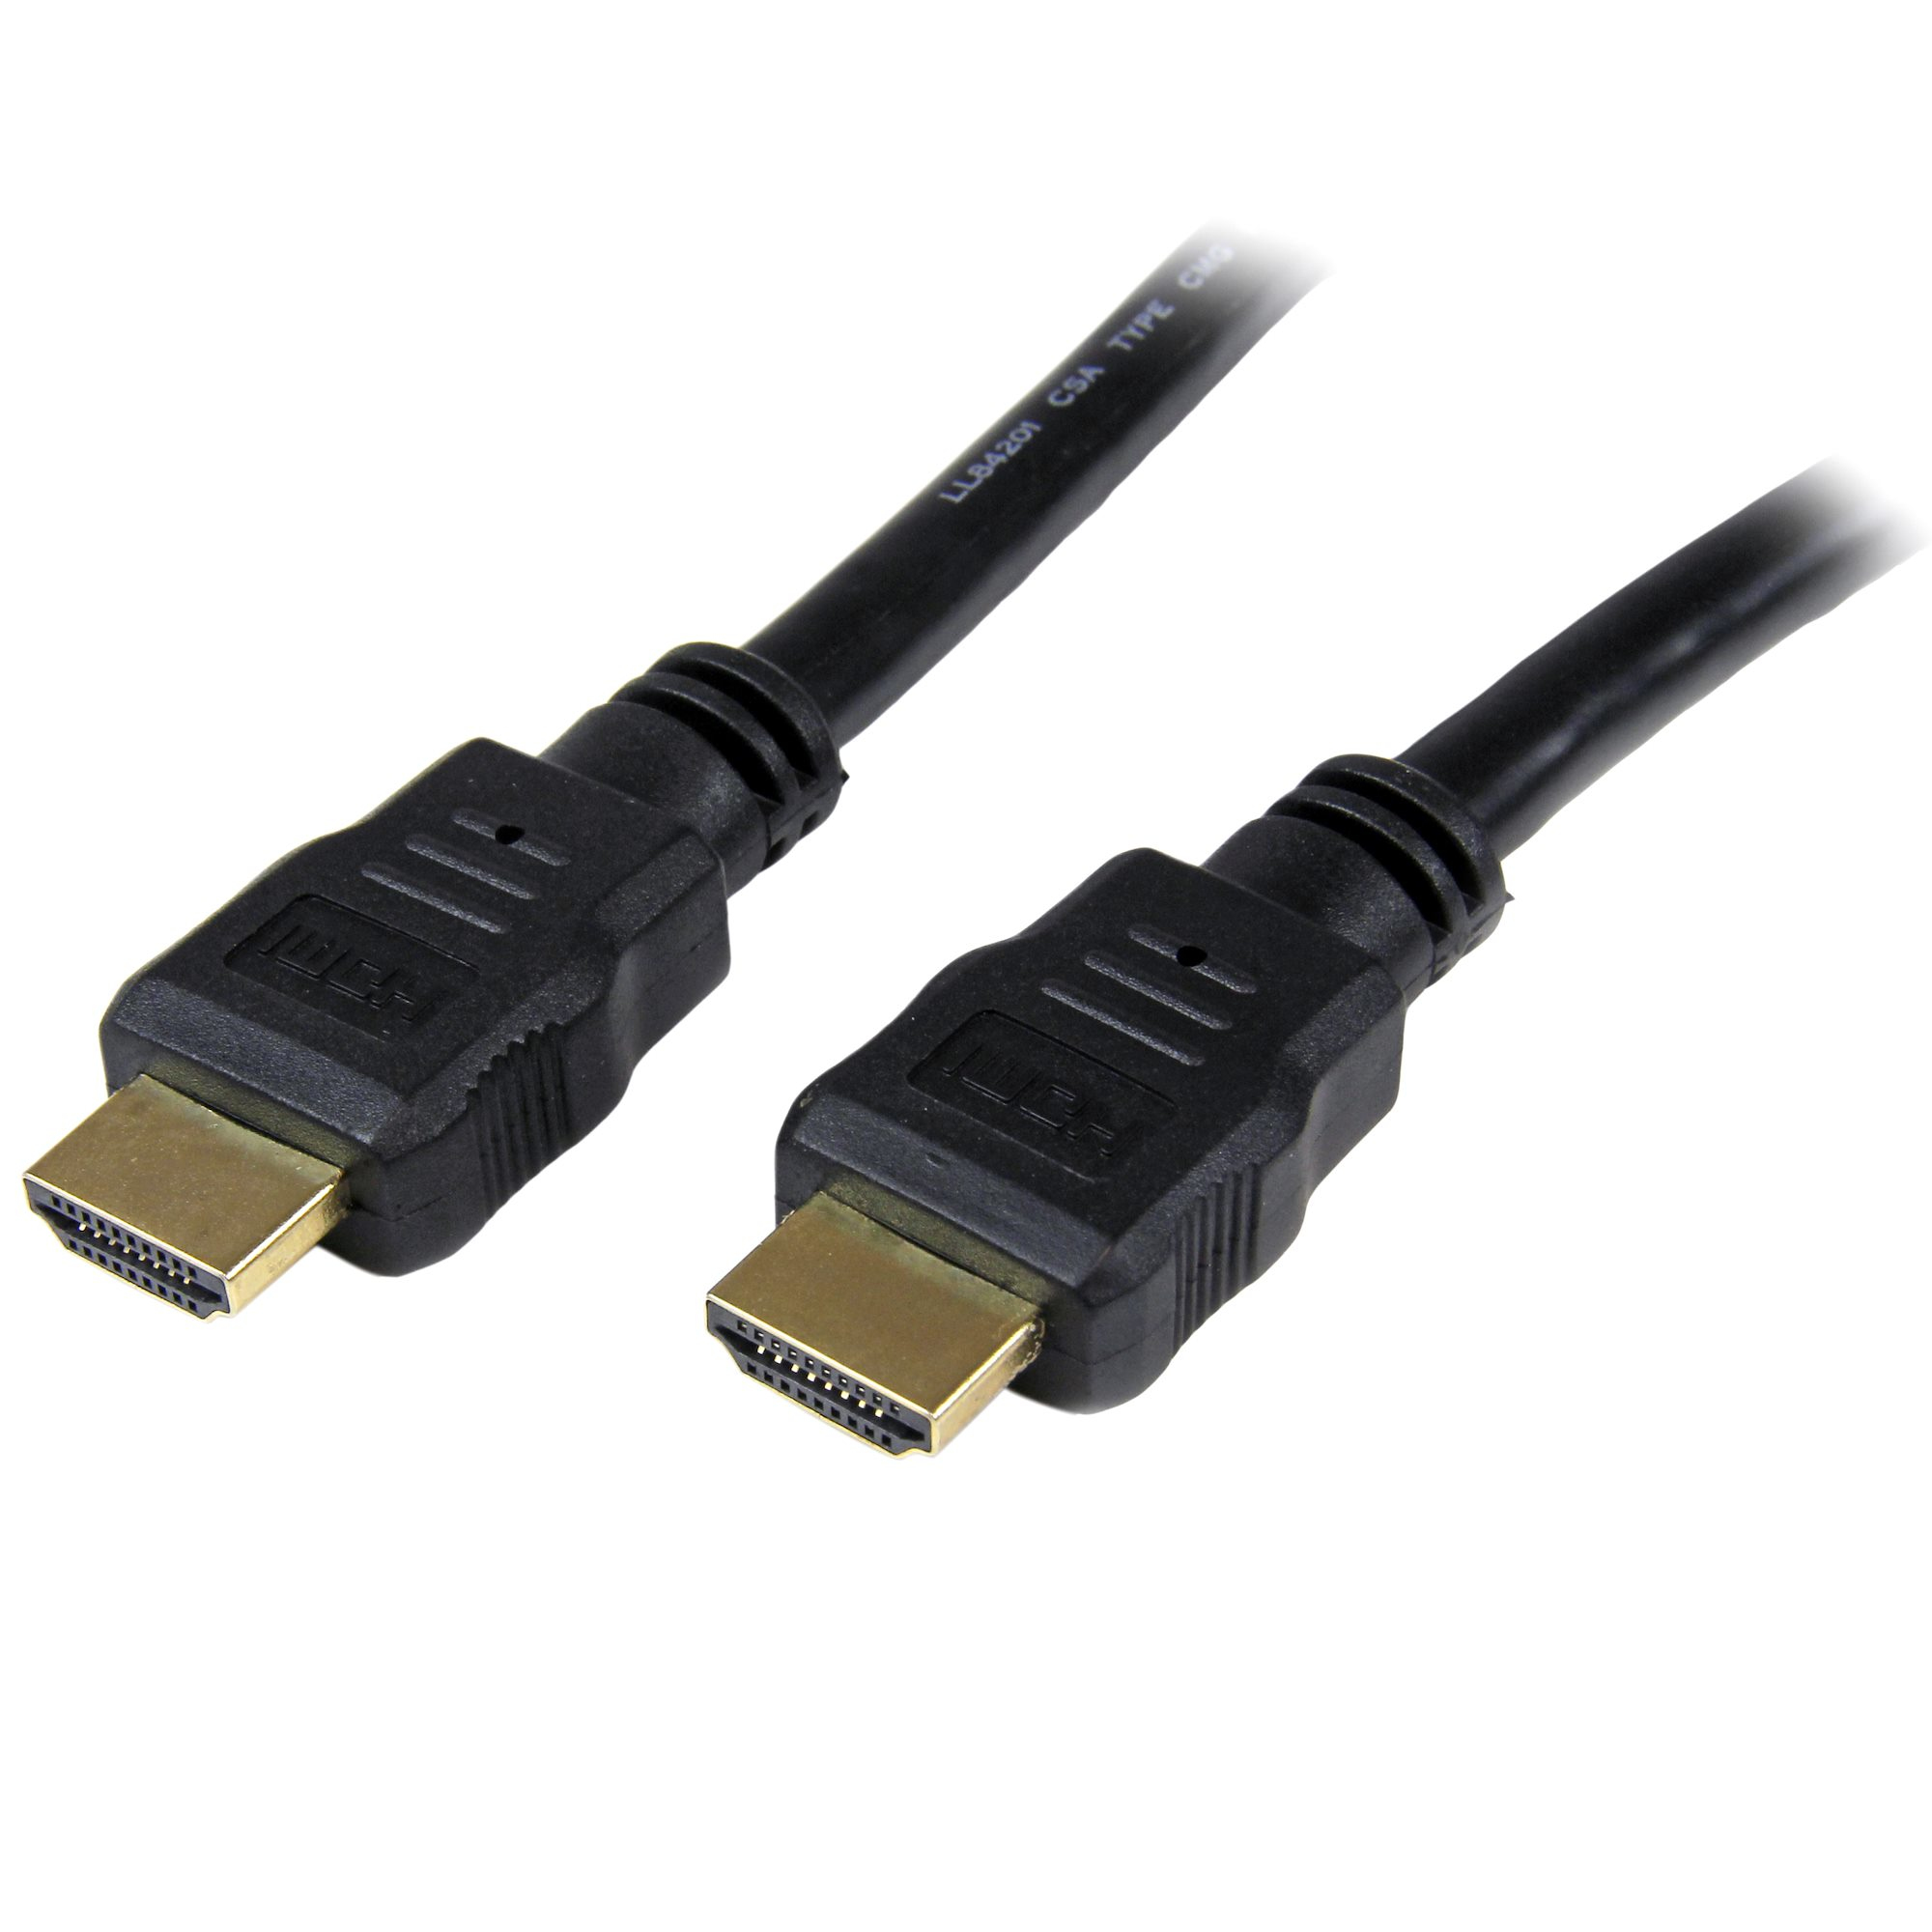 Photos - Cable (video, audio, USB) Startech.com 2m  HDMI Cable - 4K High Speed HDMI Cable with Ether HDM (6ft)